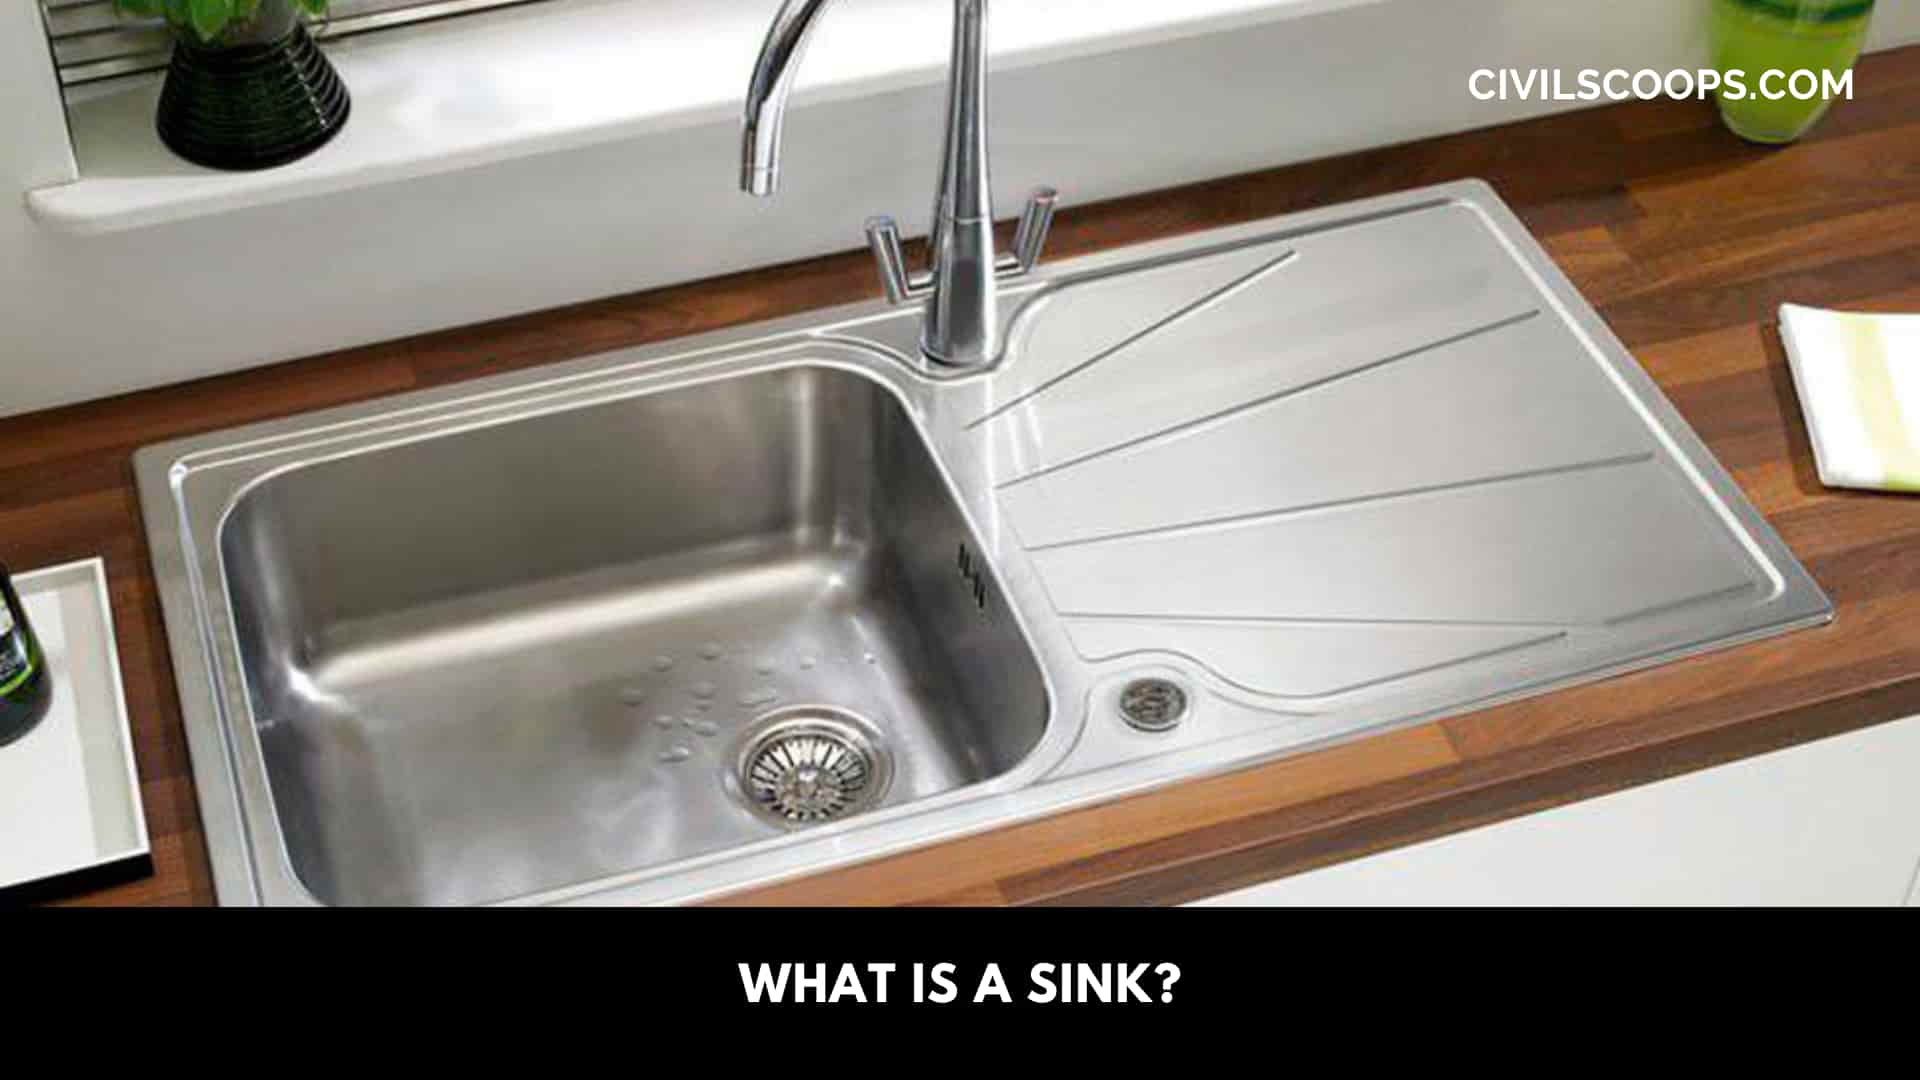 What Is a Sink?